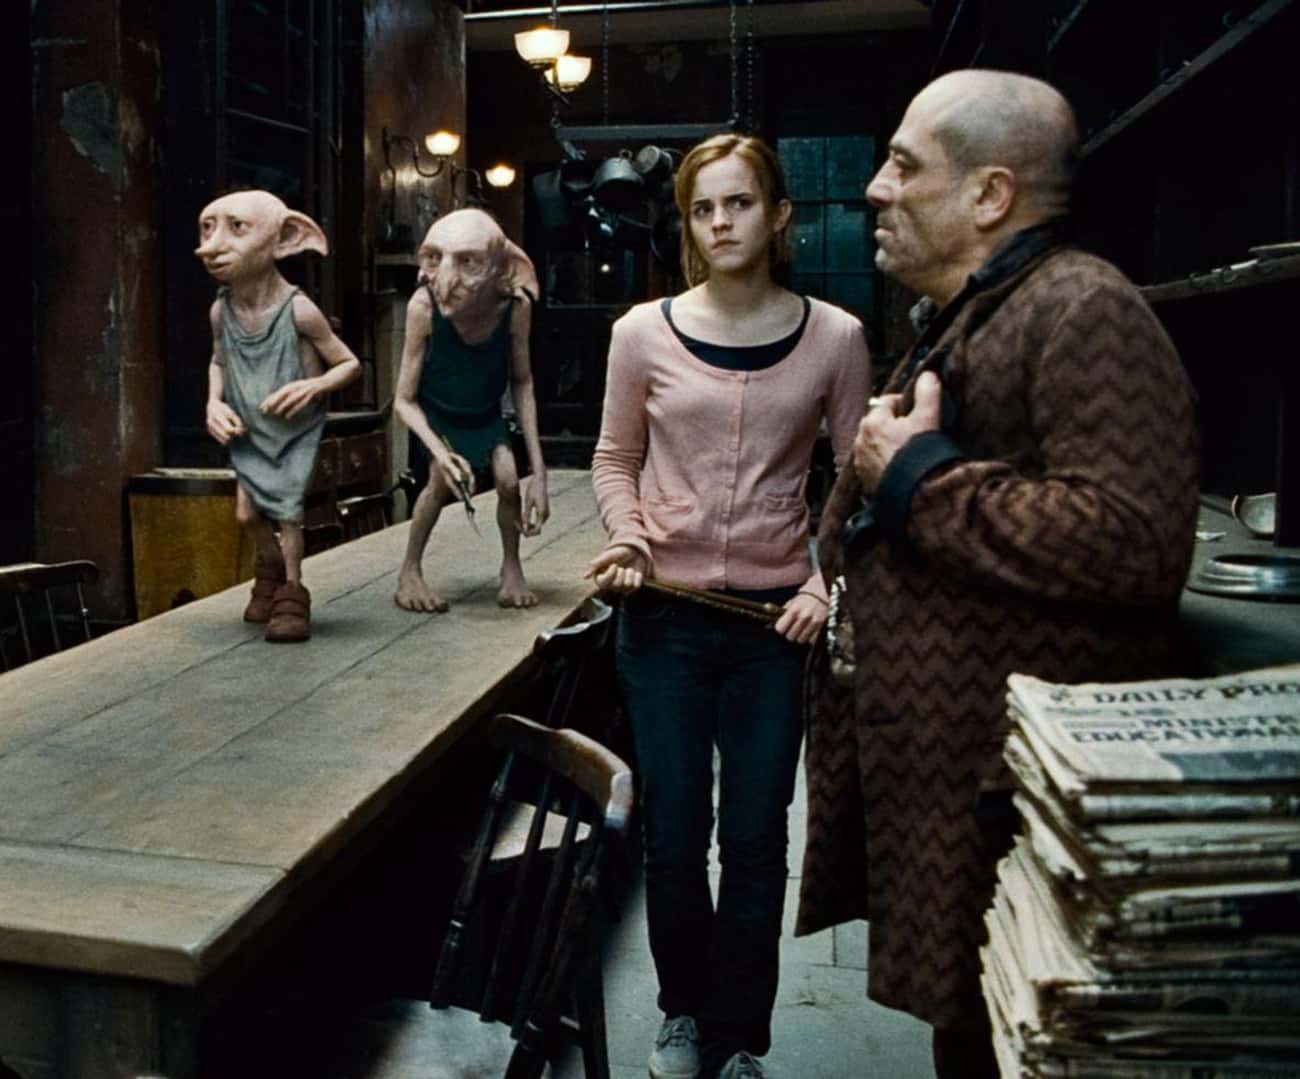 Kreacher Was Going To Be Excluded From The Movies But Was Included At J.K. Rowling's Suggestion